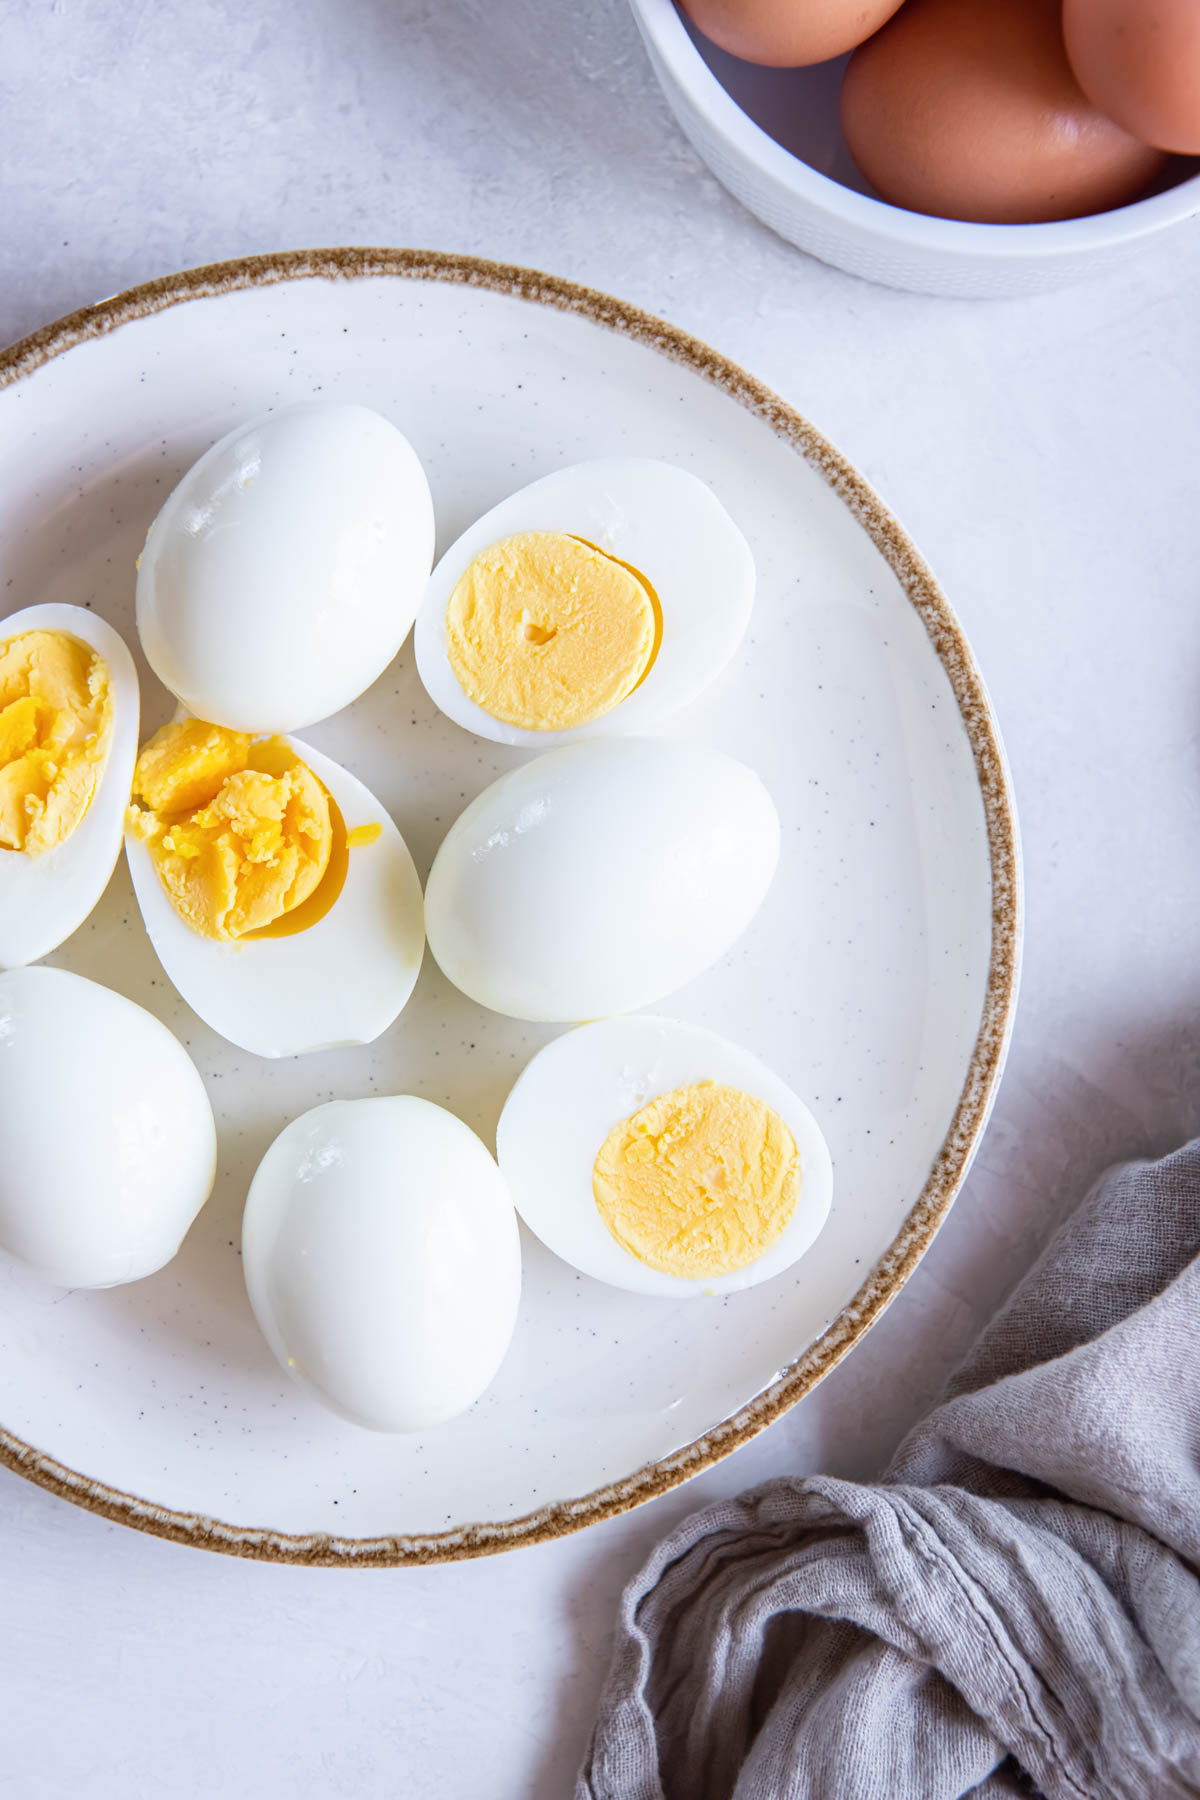 Peeled hard boiled eggs on a plate with some eggs whole and some cut in half.